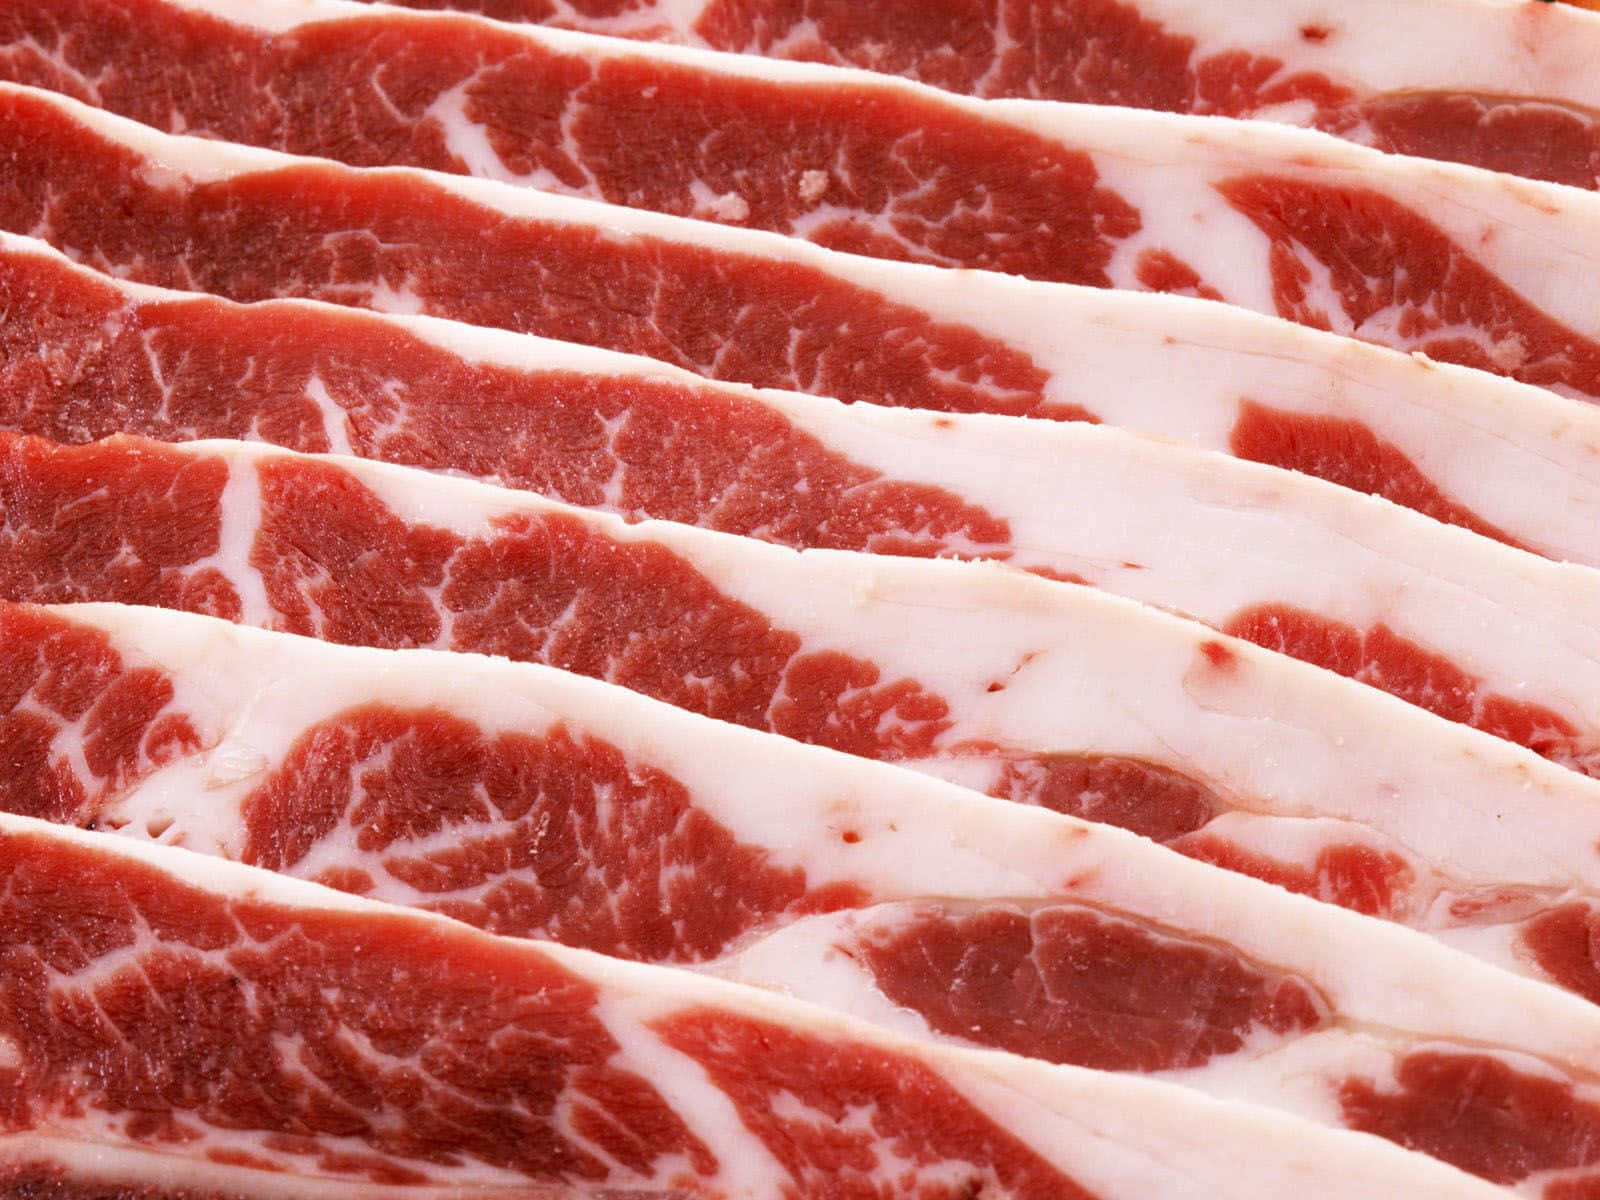 A Close Up Of A Piece Of Meat